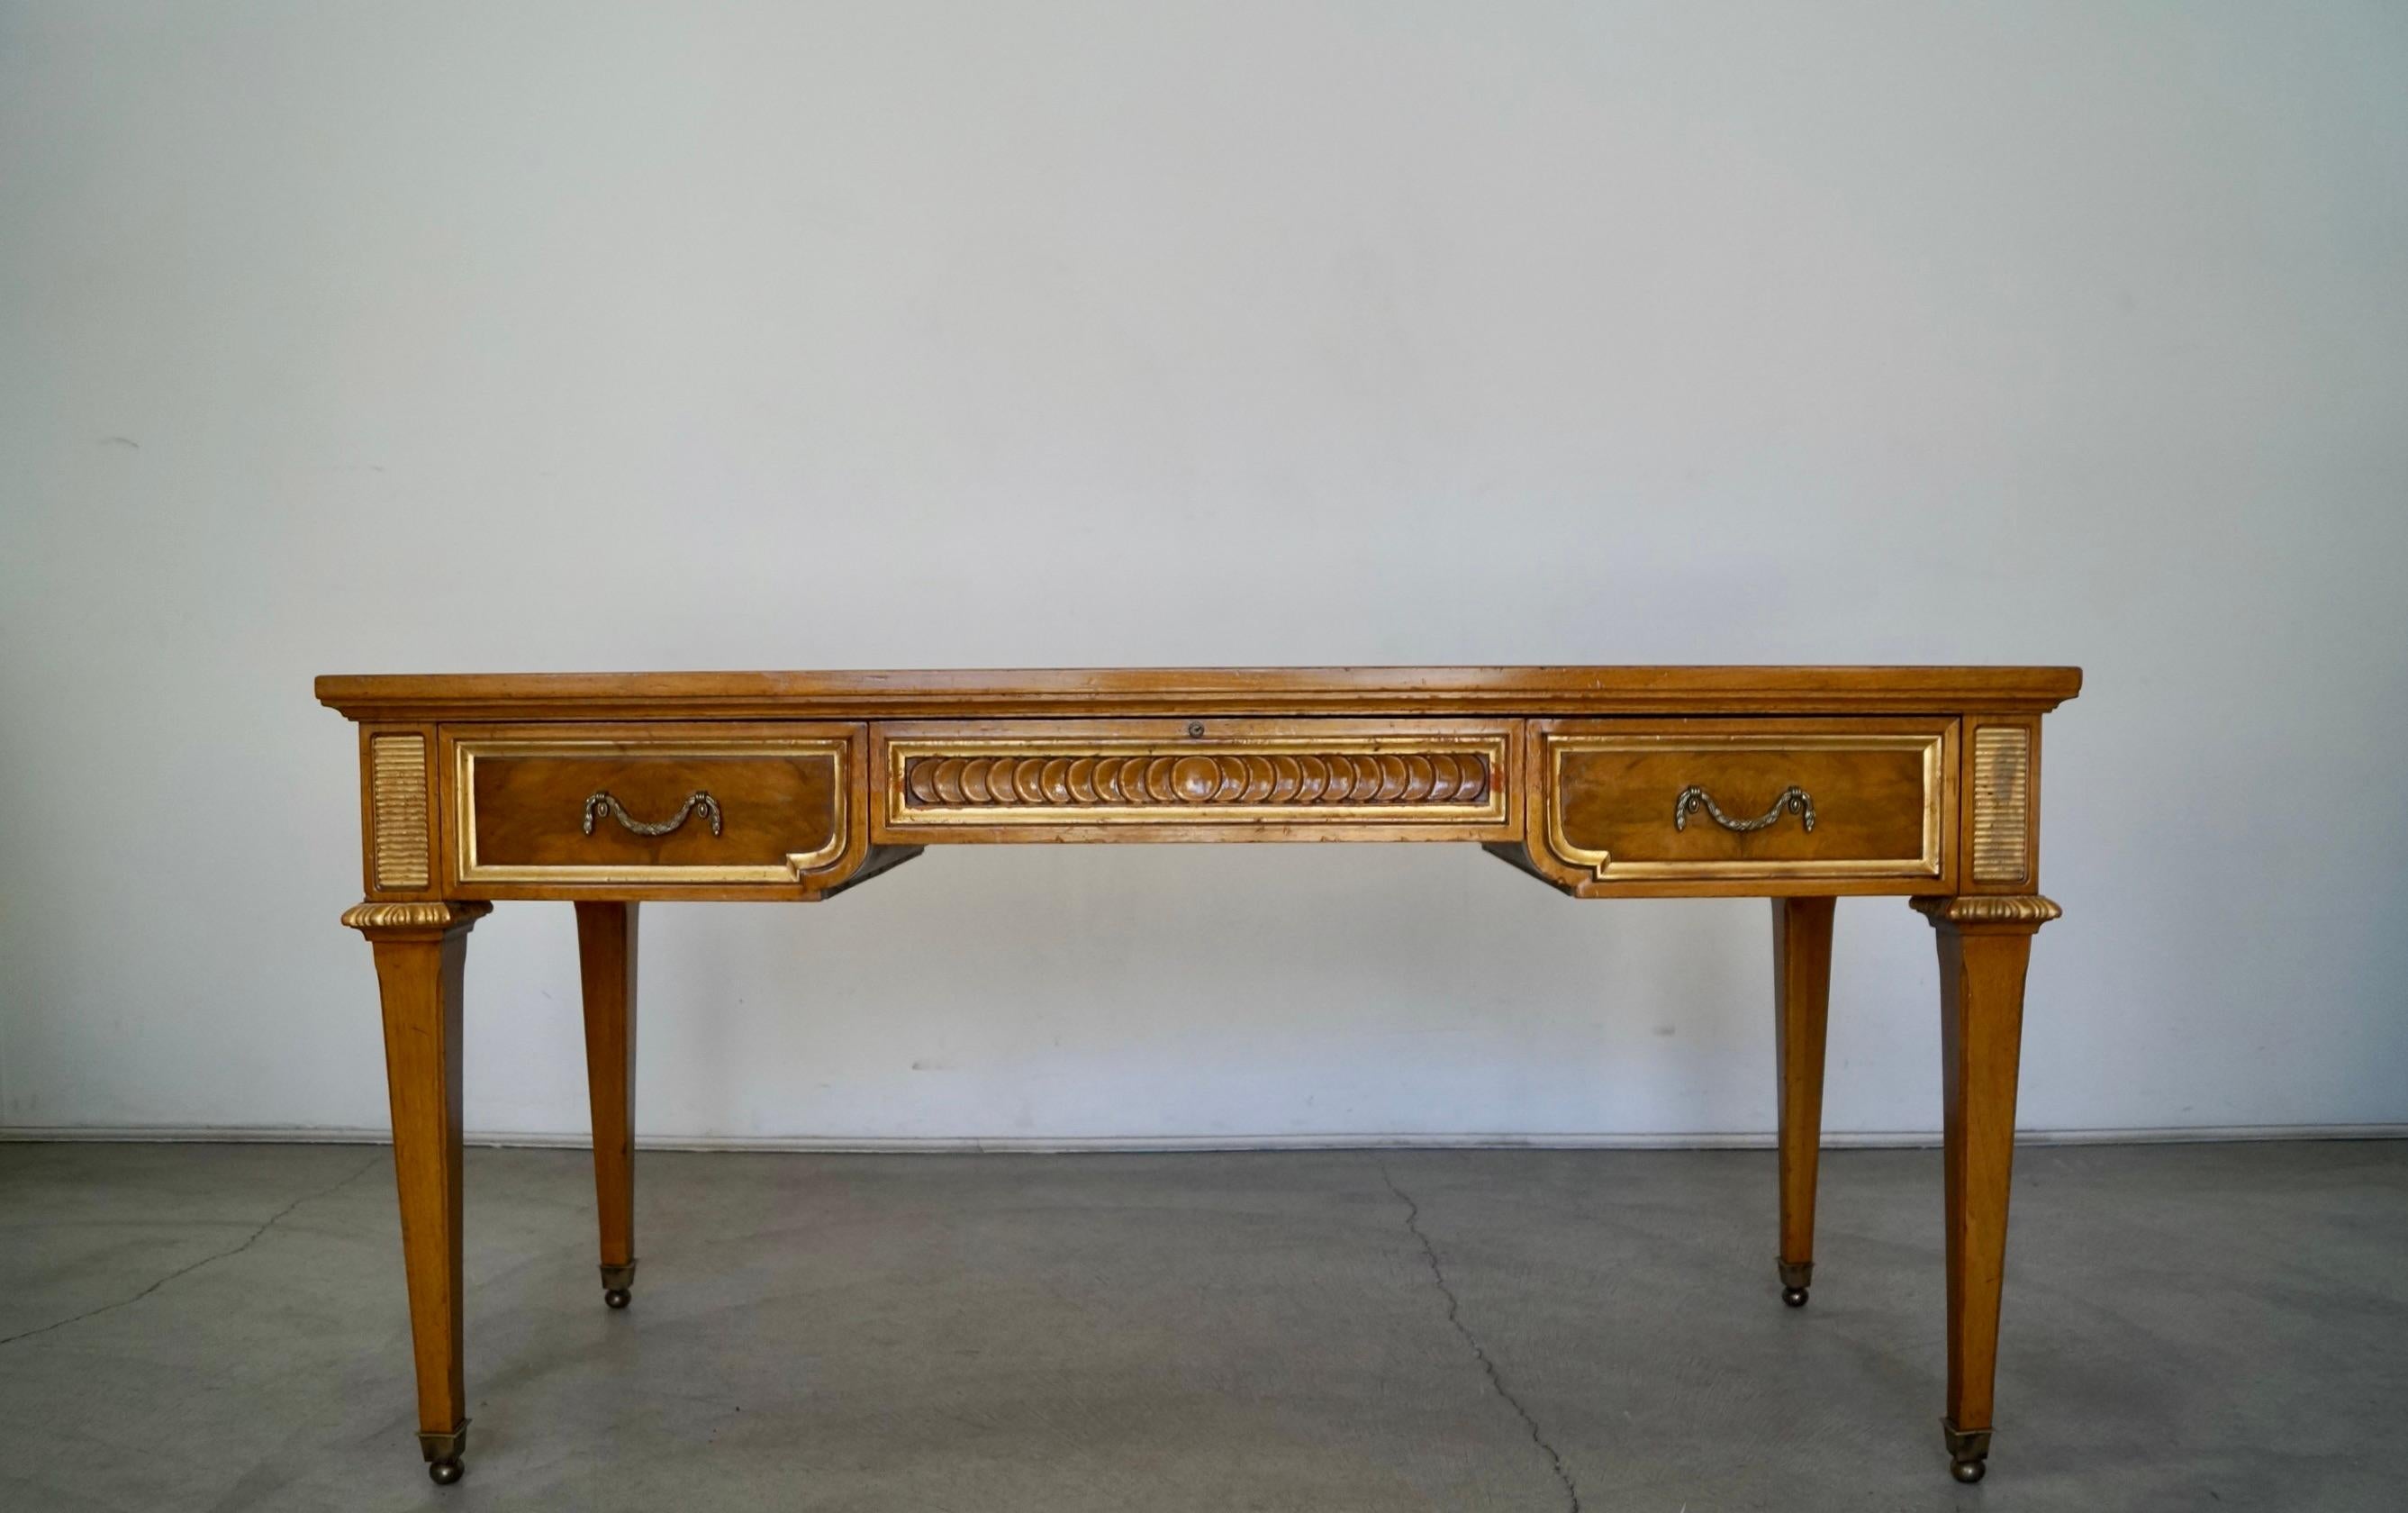 Vintage 1960s Hollywood Regency desk for sale. Manufactured by Karges in the 1960s, and in beautiful vintage condition. Really special writing desk that is really solid and well made. Has a flaming mahogany top with burl with drawers, sides, and